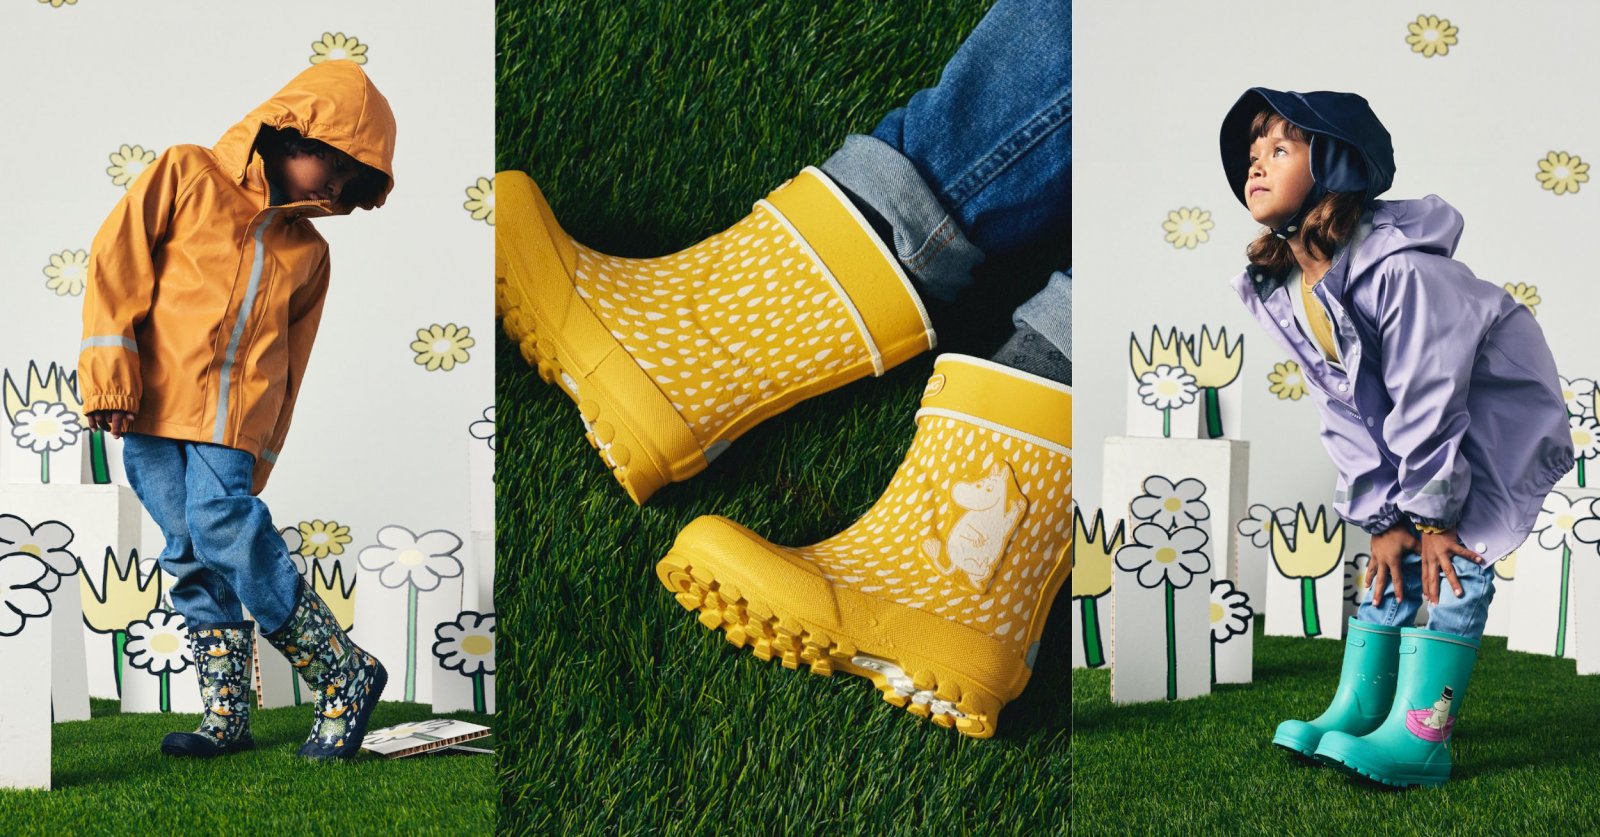 Explore the outdoors in Moomin rubber boots by Viking